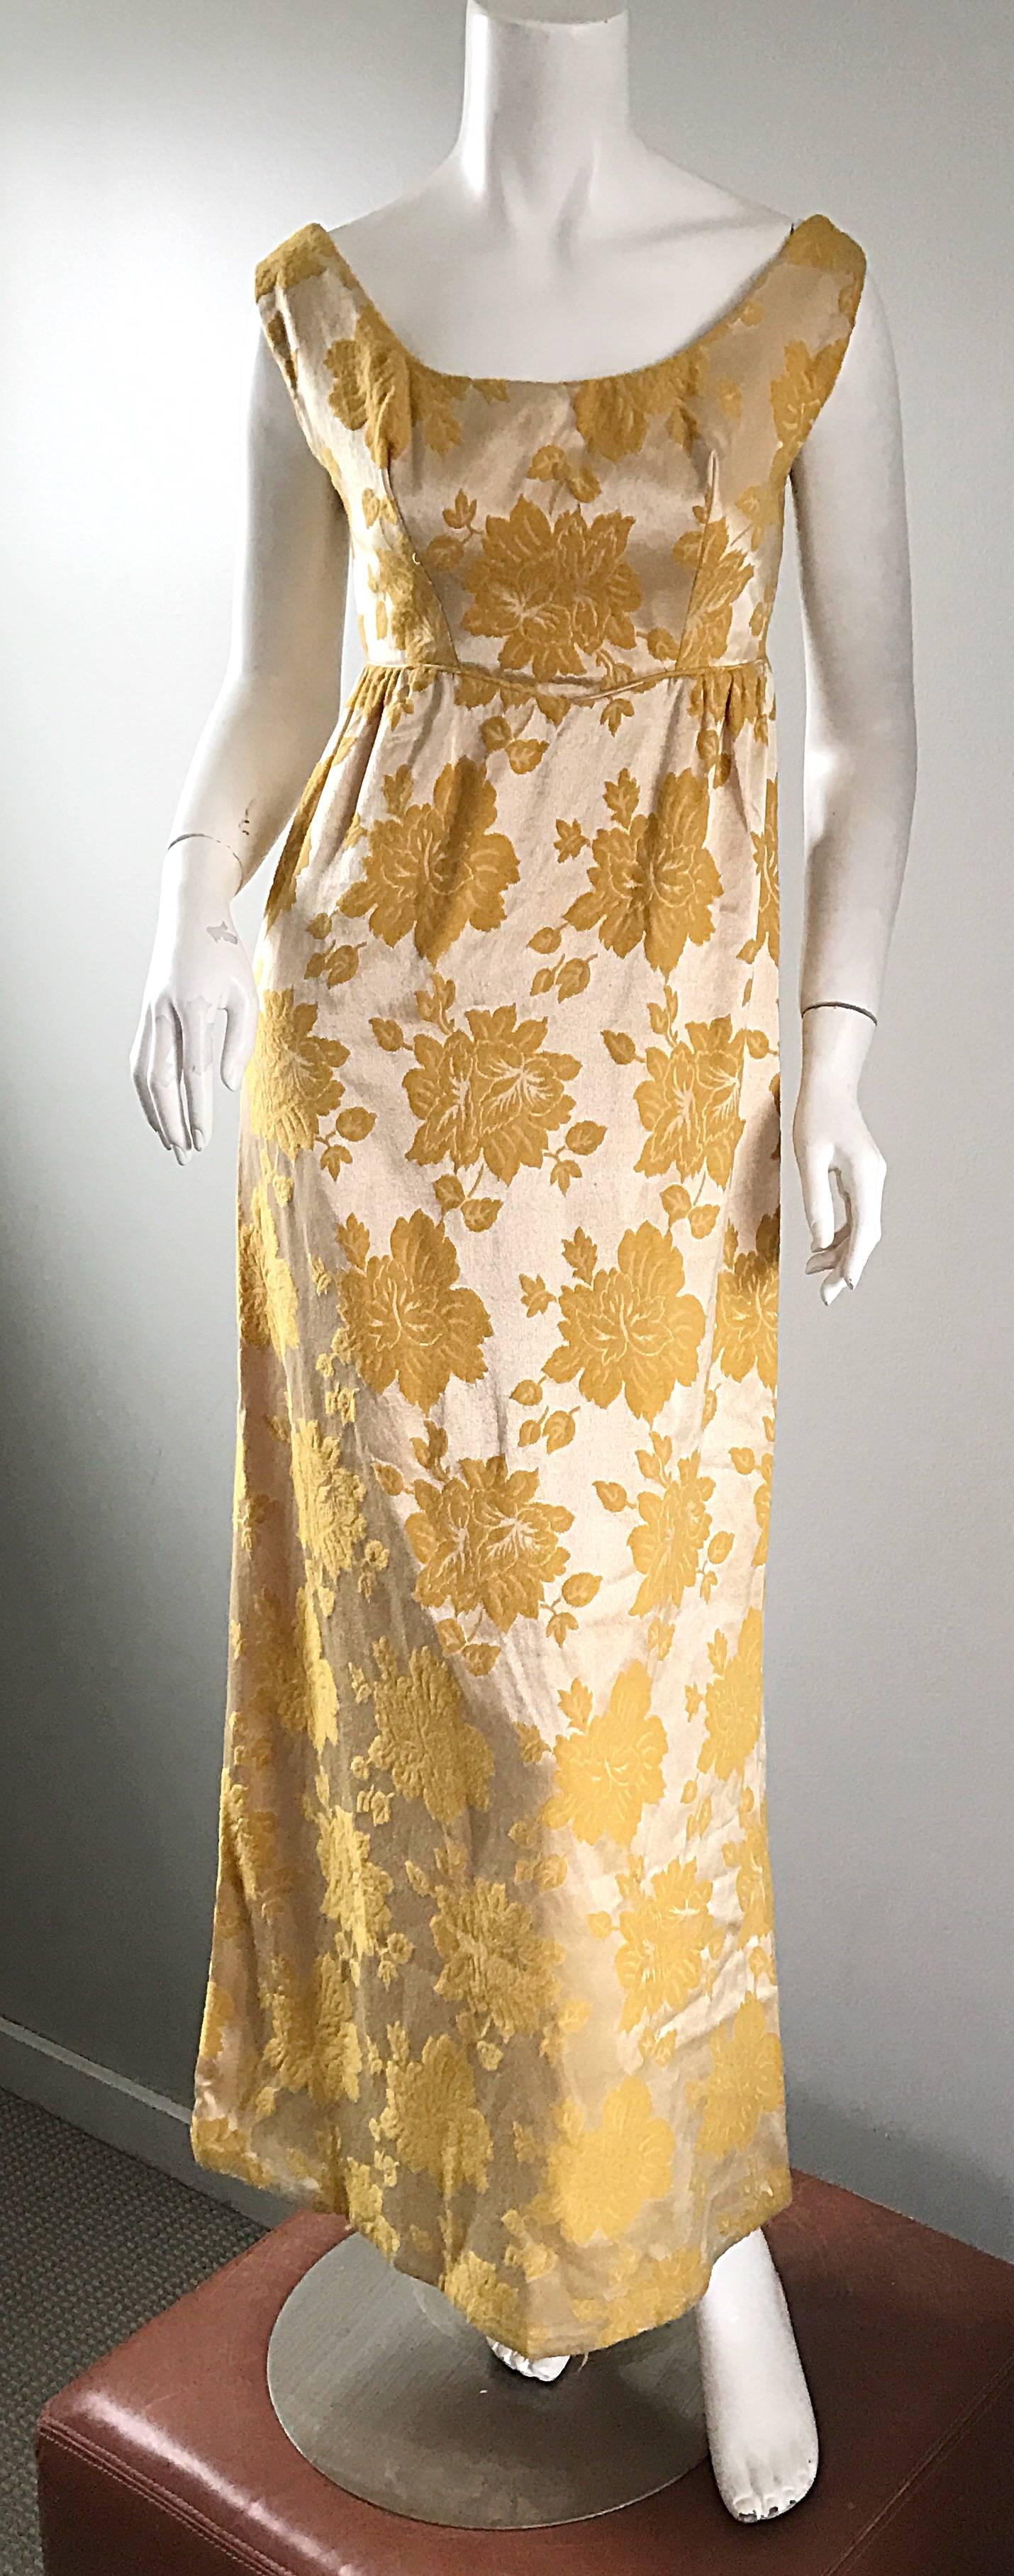 Gorgeous 1960s gold and marigold yellow floral silk gown! Wonderful form fitting bodice sits slightly off the shoulder, with a column skirt. Floral print, with a slight sheen background. Regal, and classic beauty that looks amazing on! Full metal